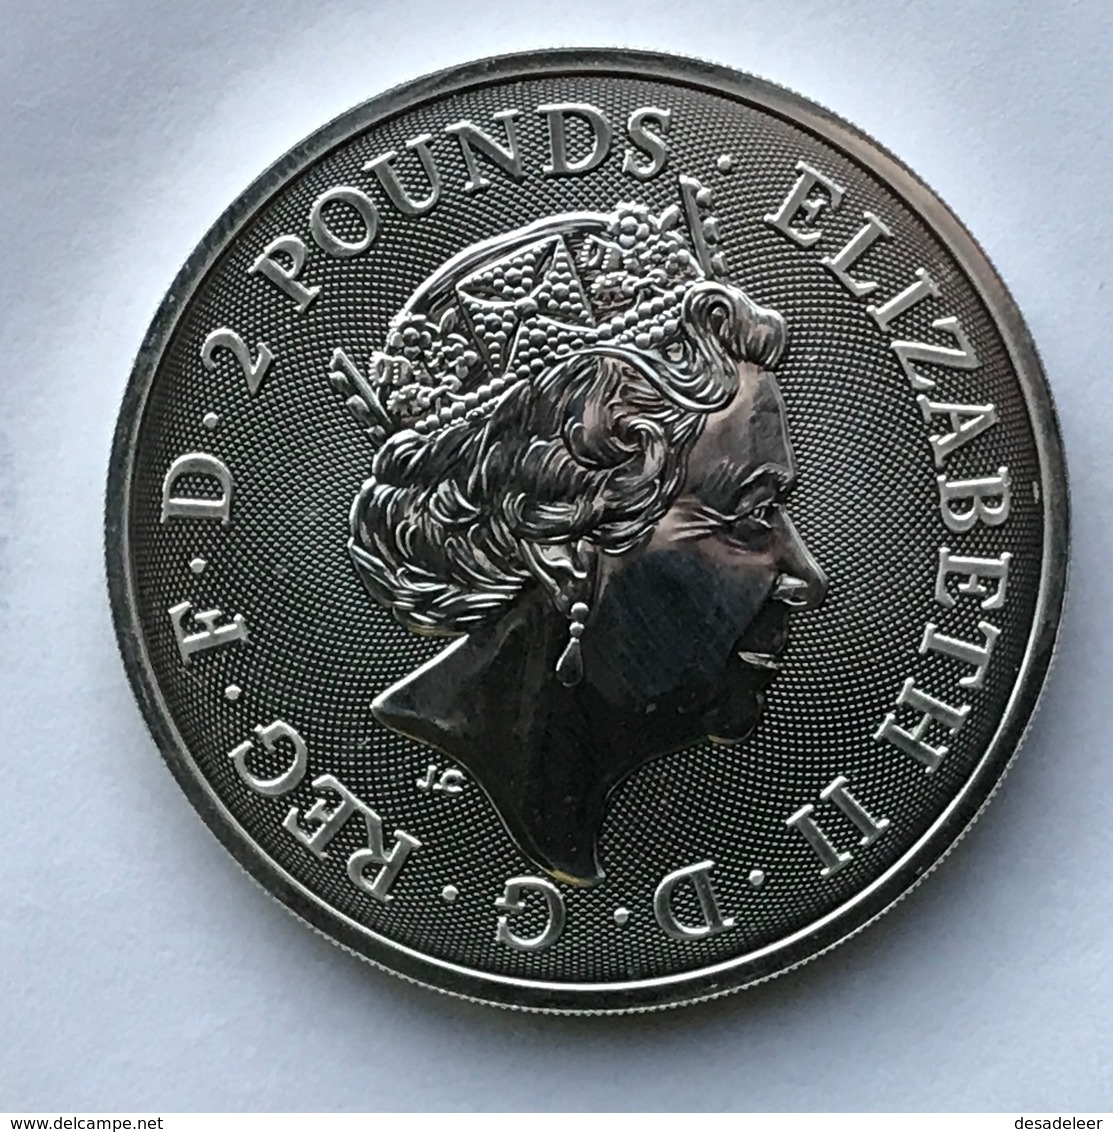 2 Pounds - United Kingdom 2018 - Year Of The Dog - Gilded Edtion, 999 Silver - 2 Pounds